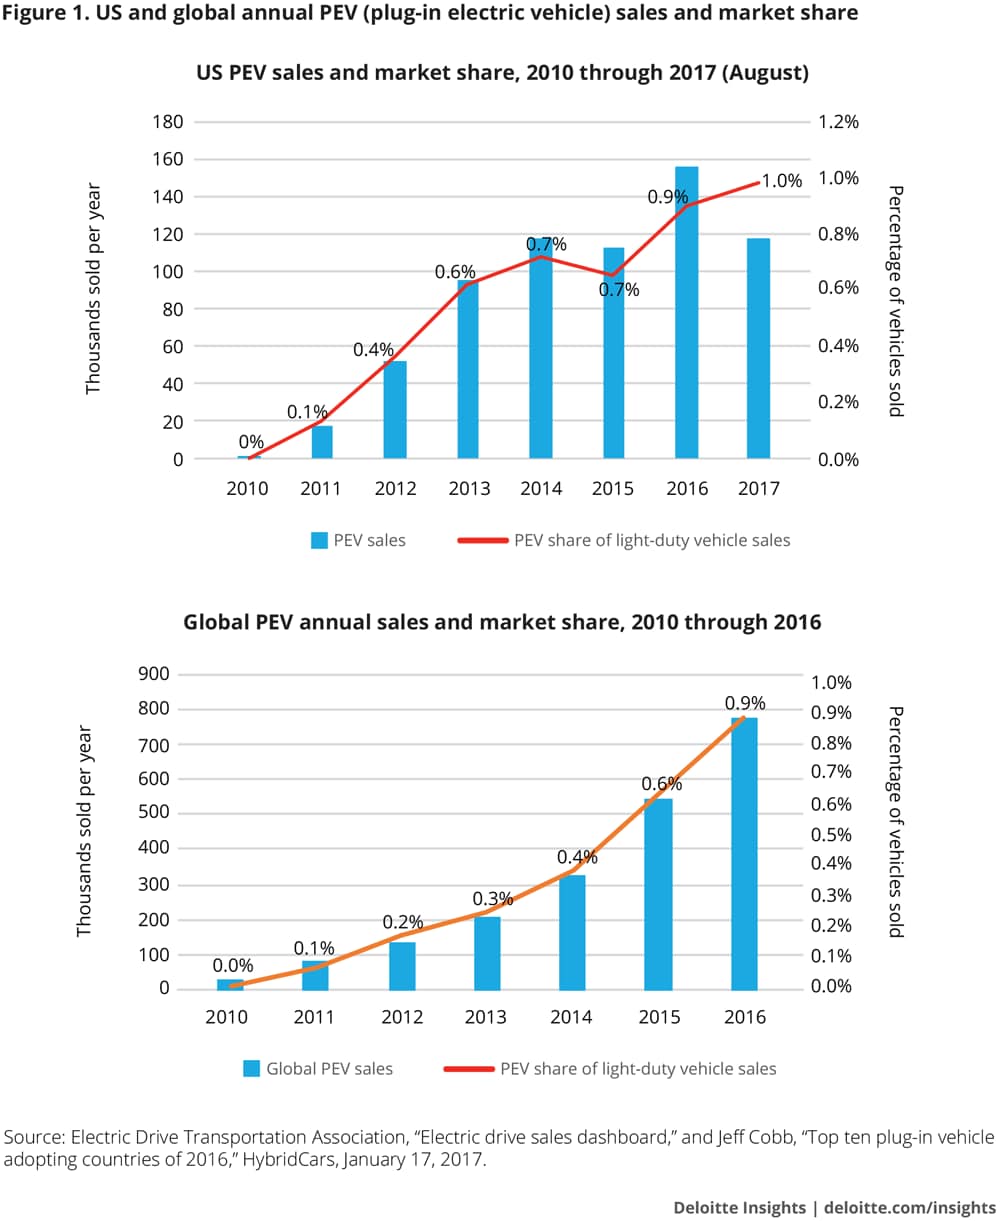 US and global annual PEV sales and market share